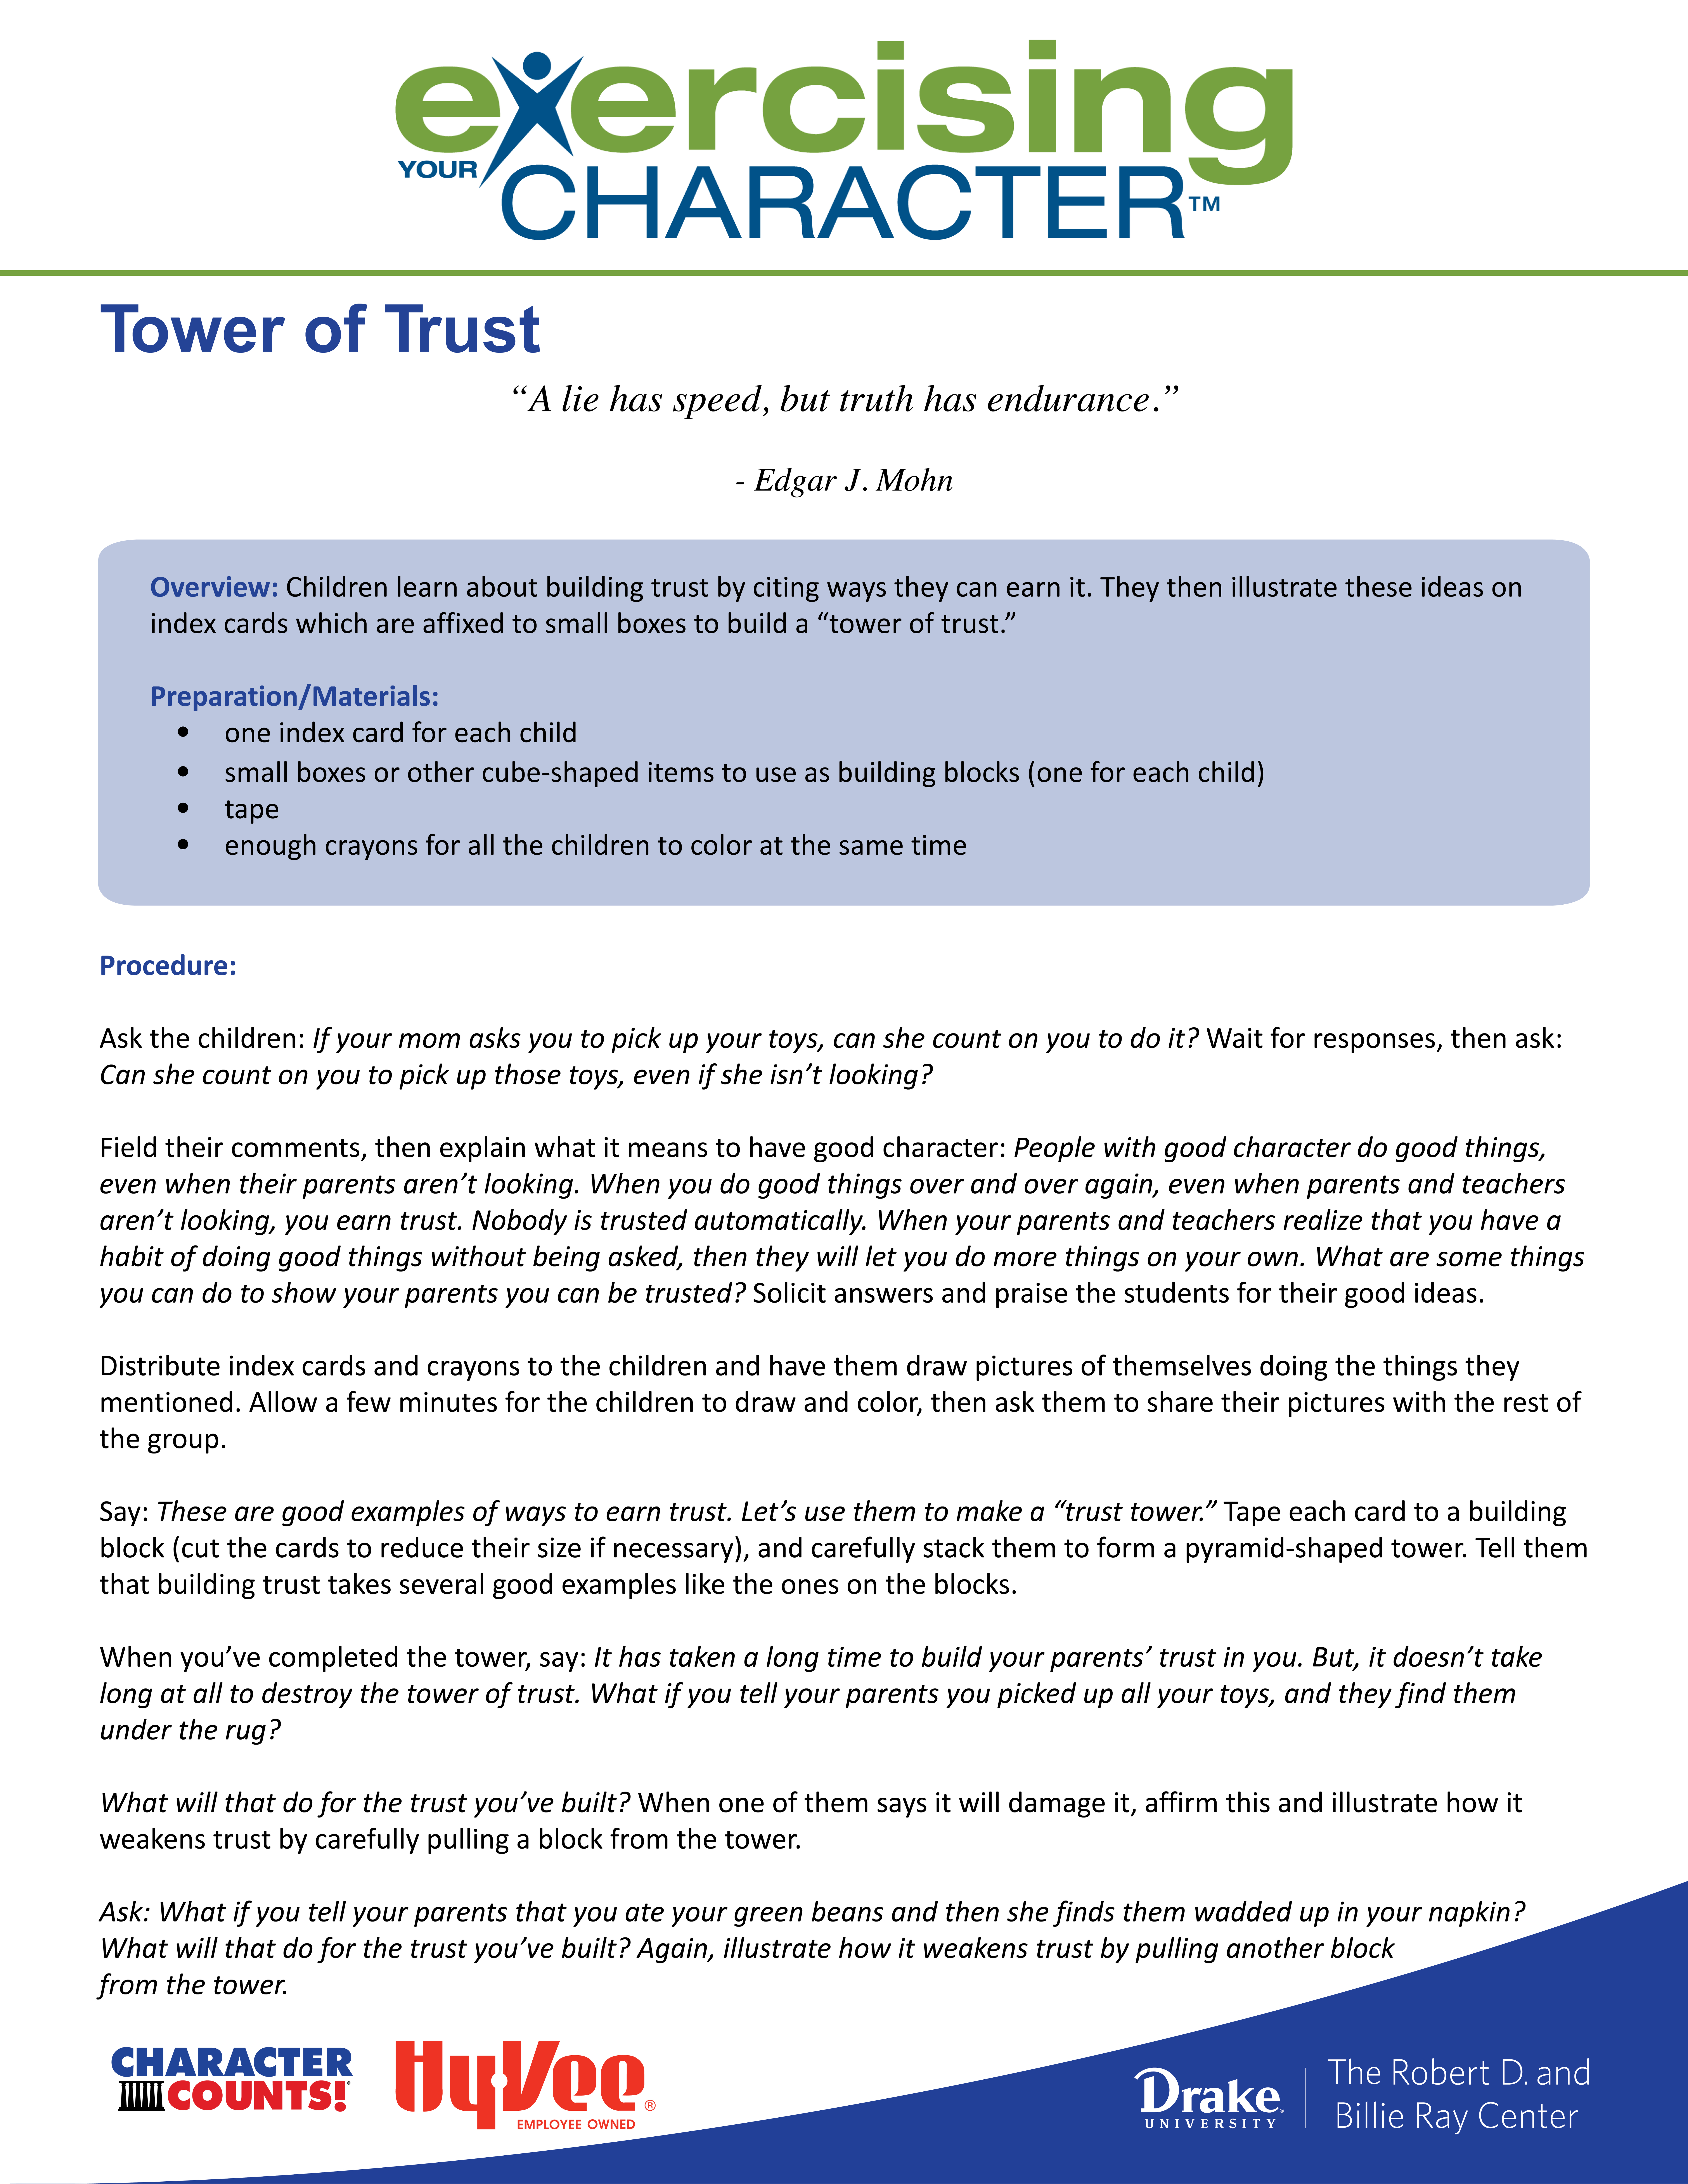 Exercising Your Character Tower of Trust